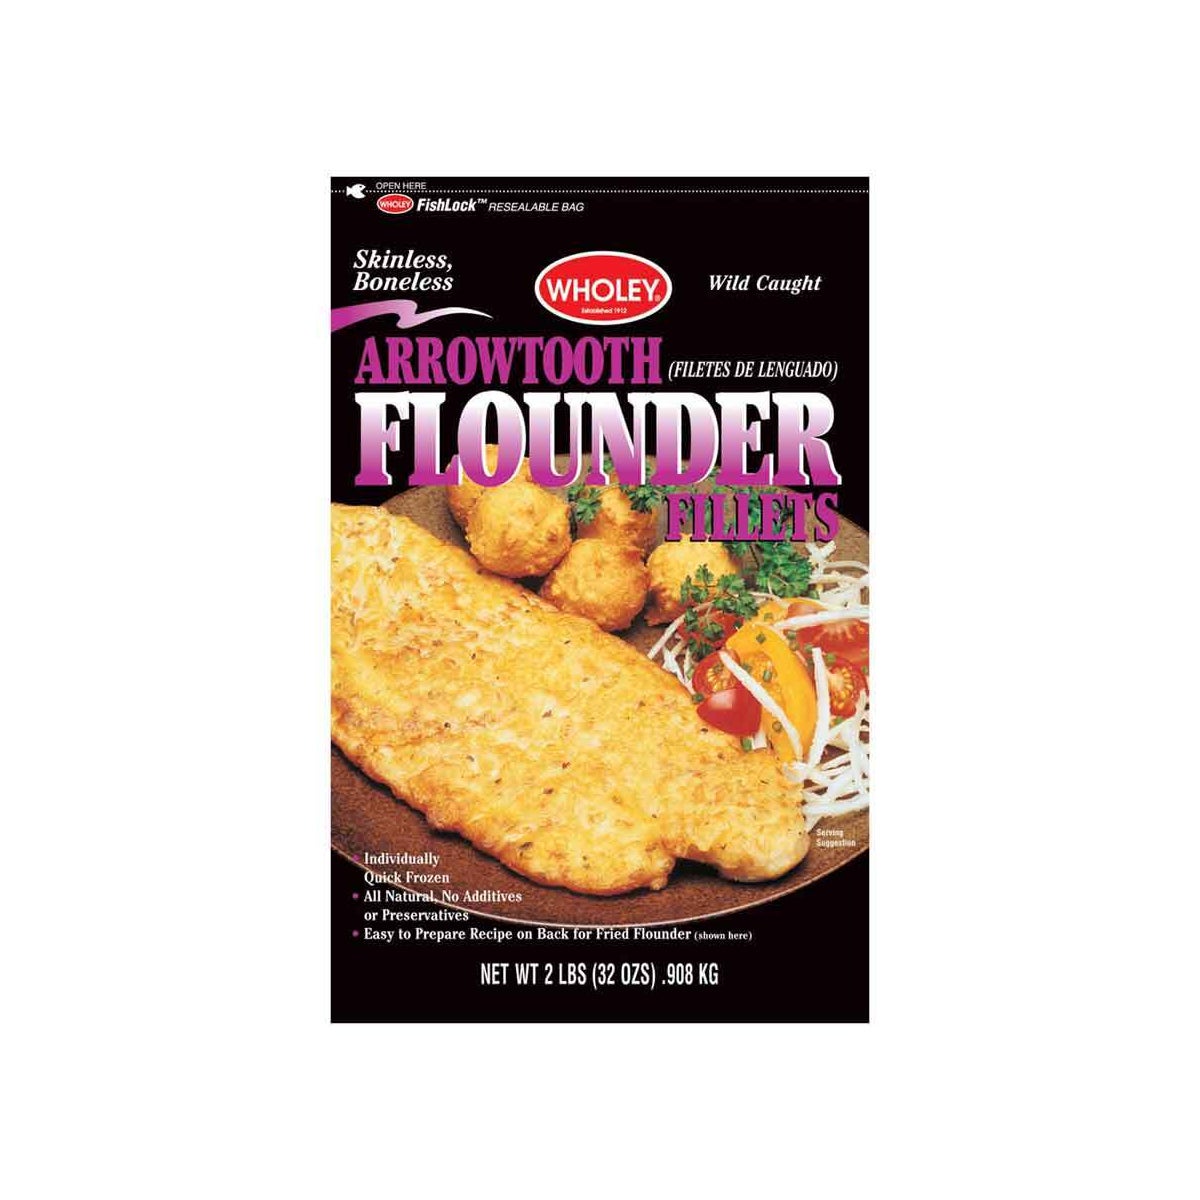 WHOLEY FLOUNDER FILLETS 2 LBS